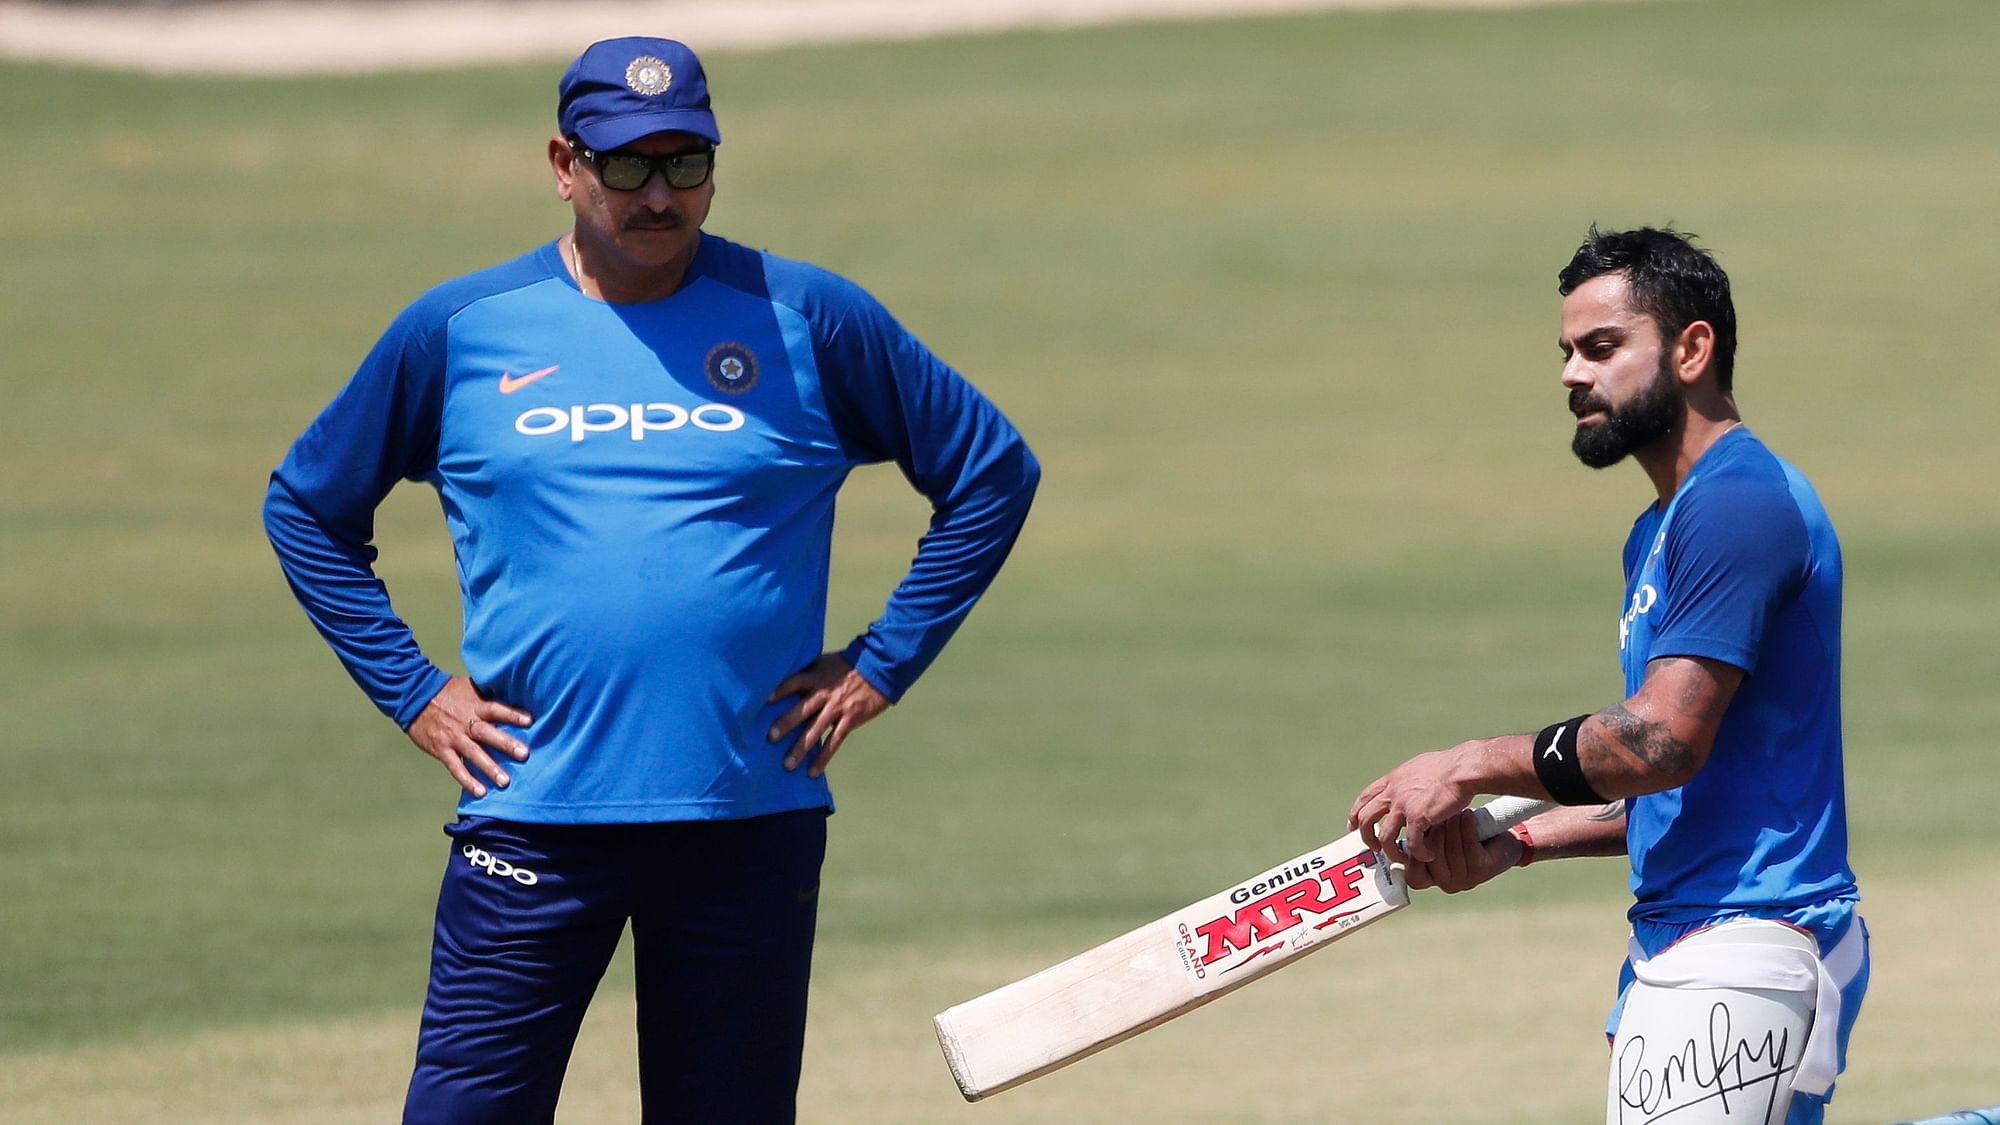 Indian coach Ravi Shastri has said he is confident of the team’s abilities.&nbsp;